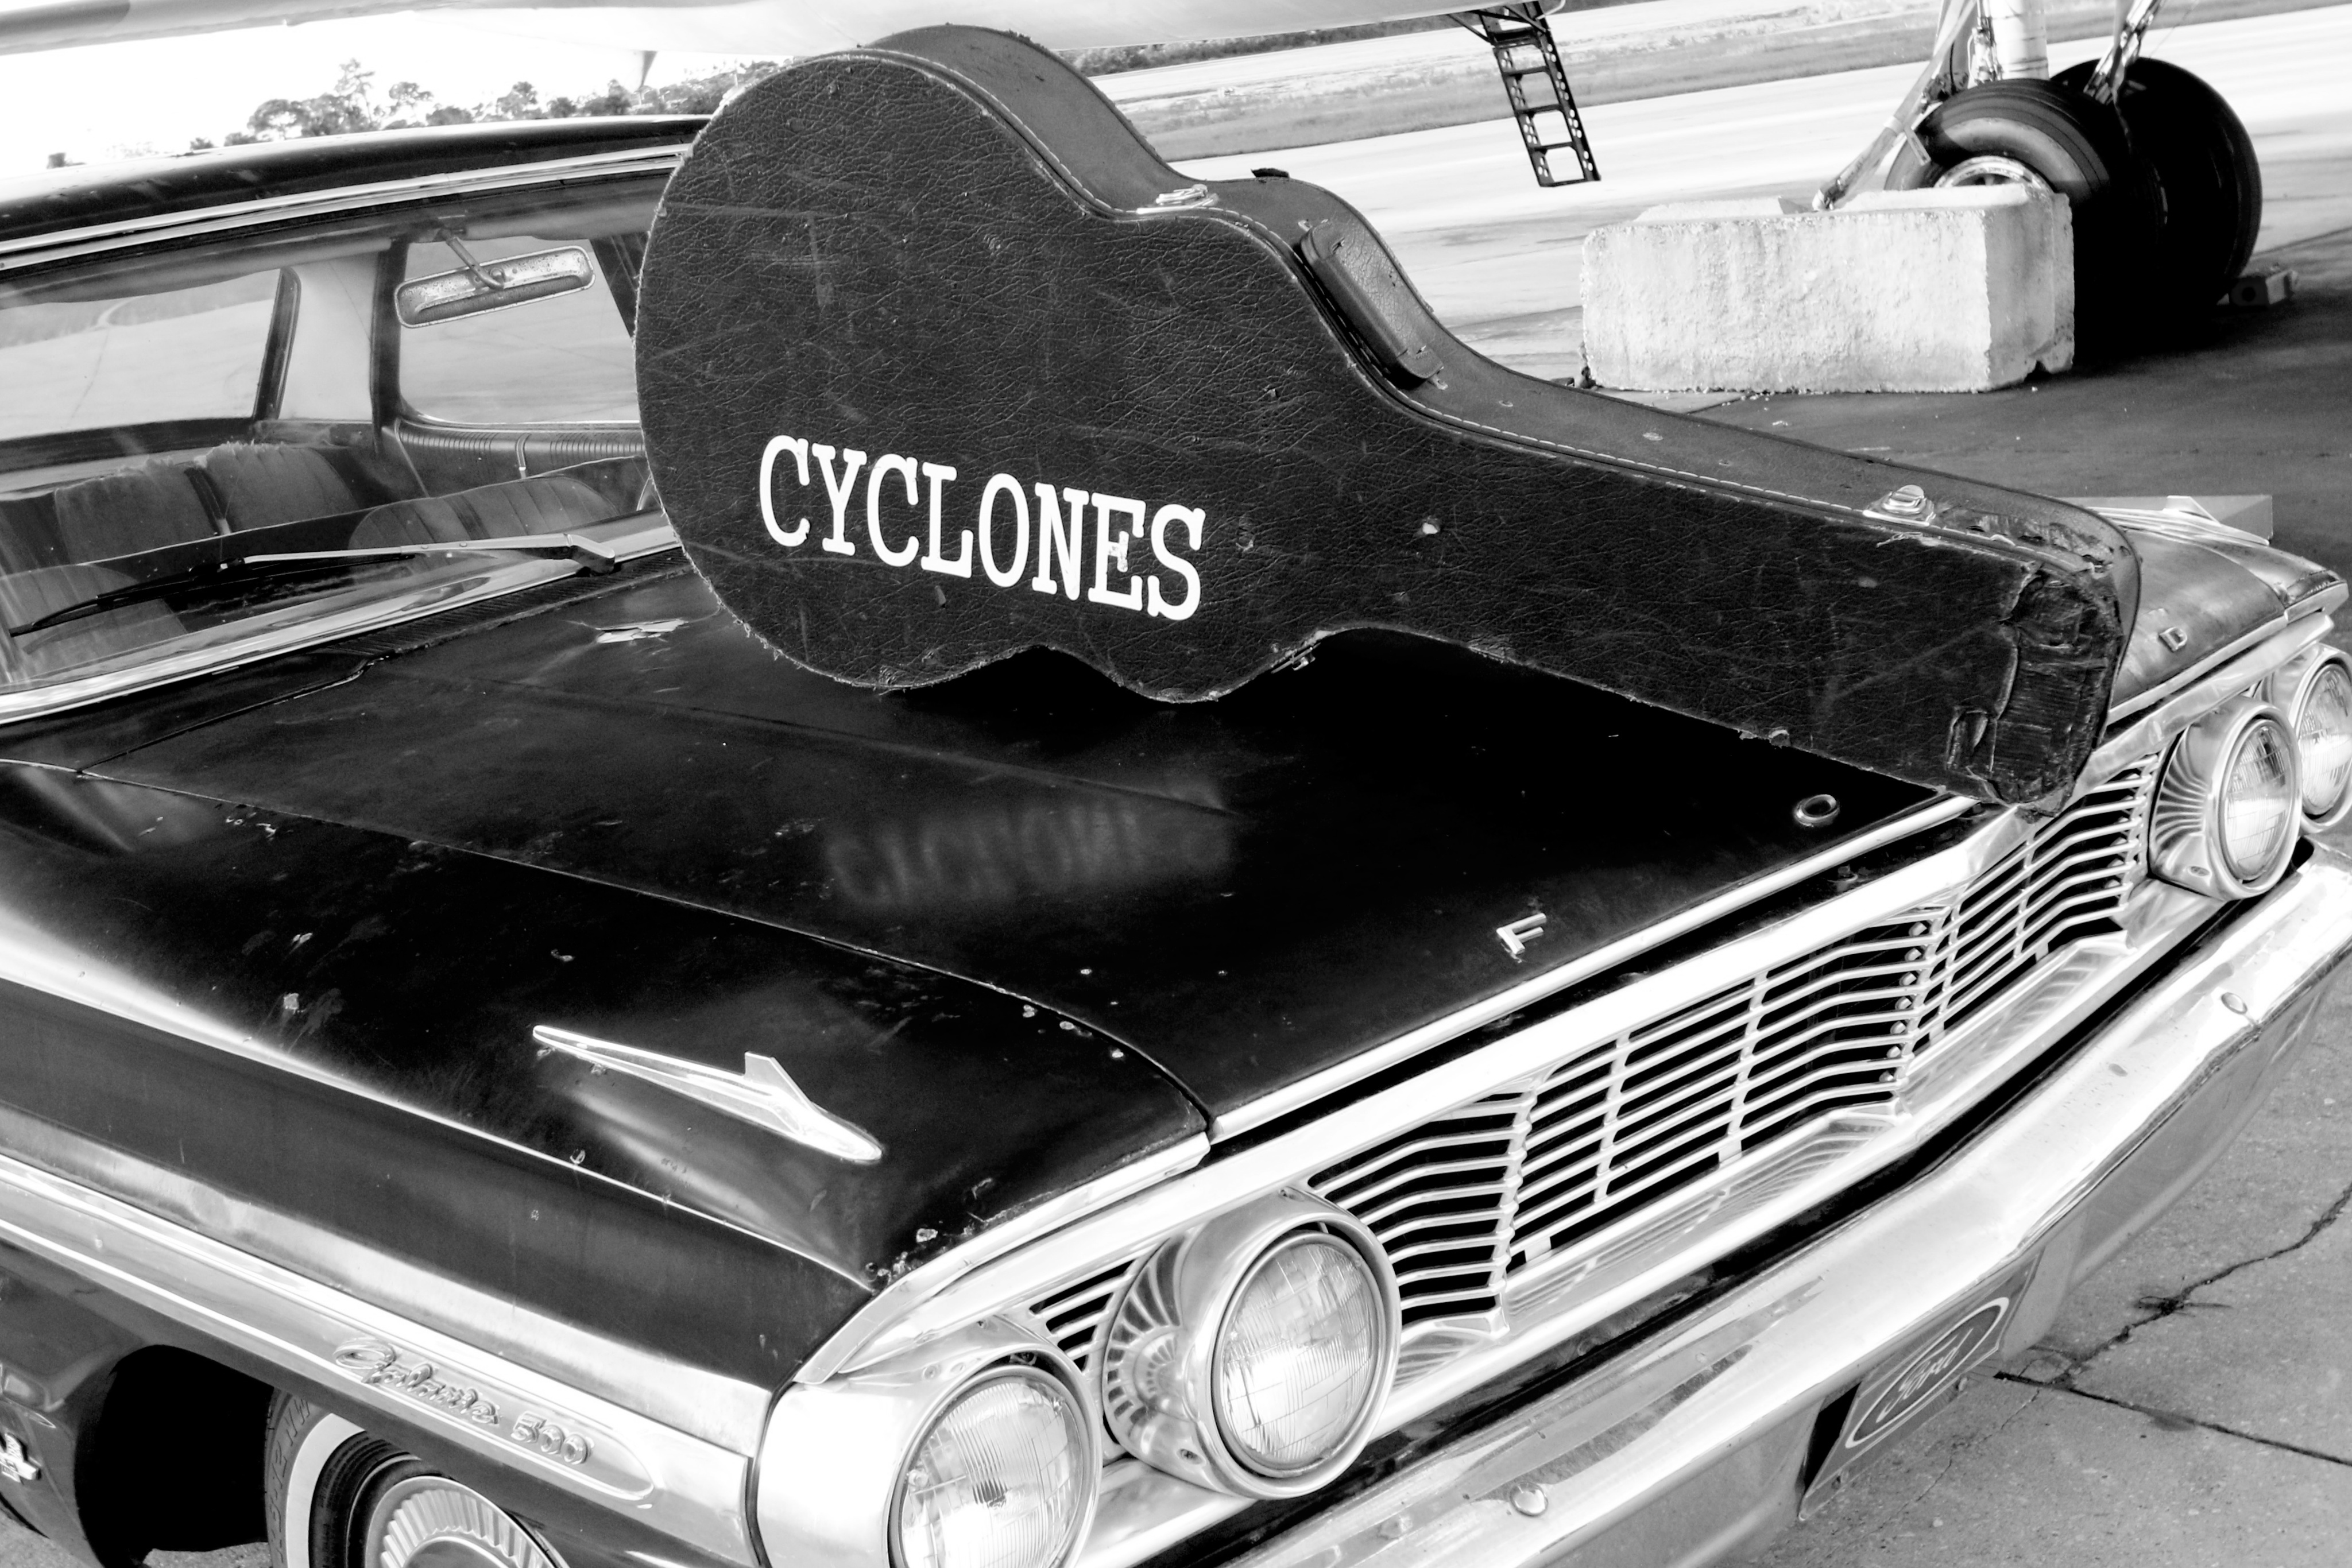 Legendary-Cyclones-black-and-white